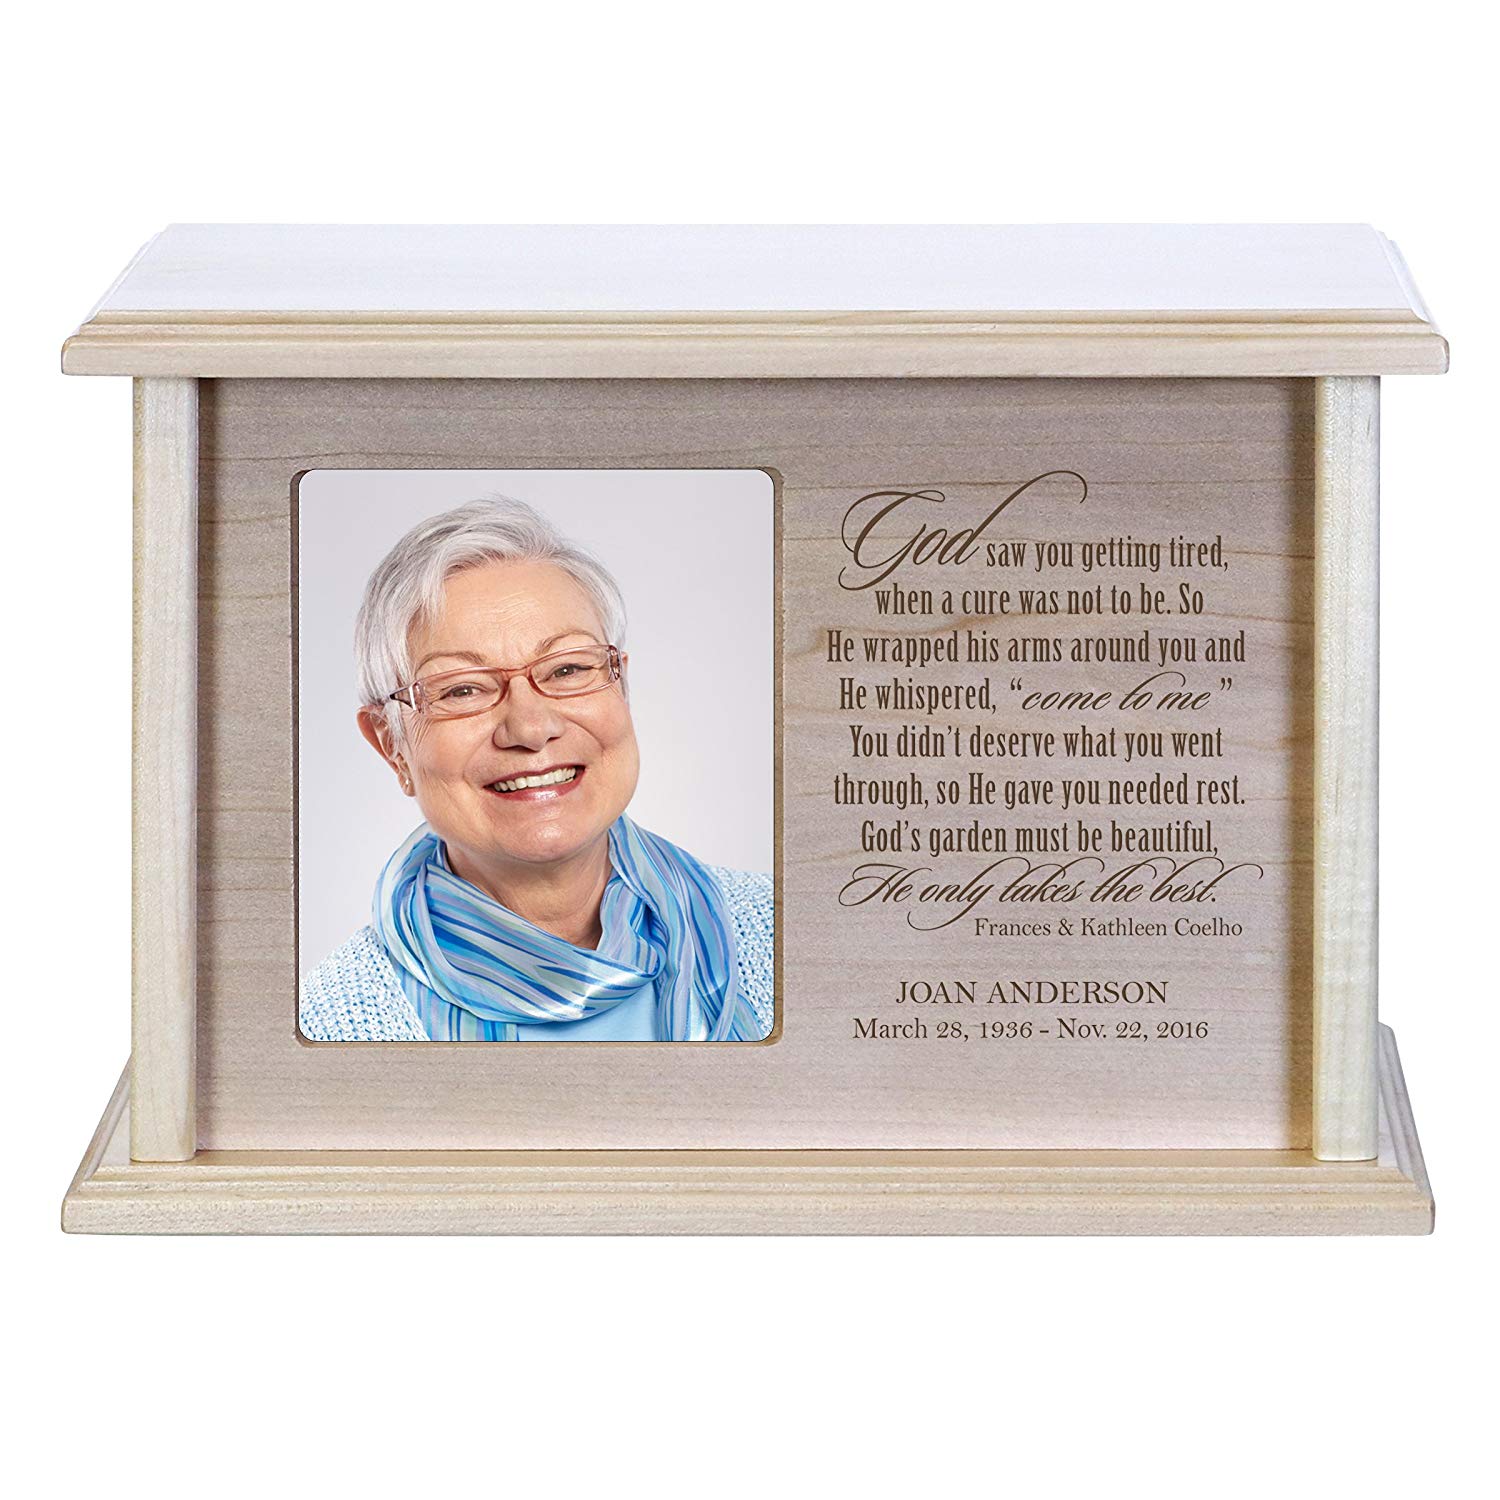 Custom Engraved Solid Wood Cremation Urn Box with 4x6 Photo holds 200 cu in of Human Ashes God Saw You - LifeSong Milestones